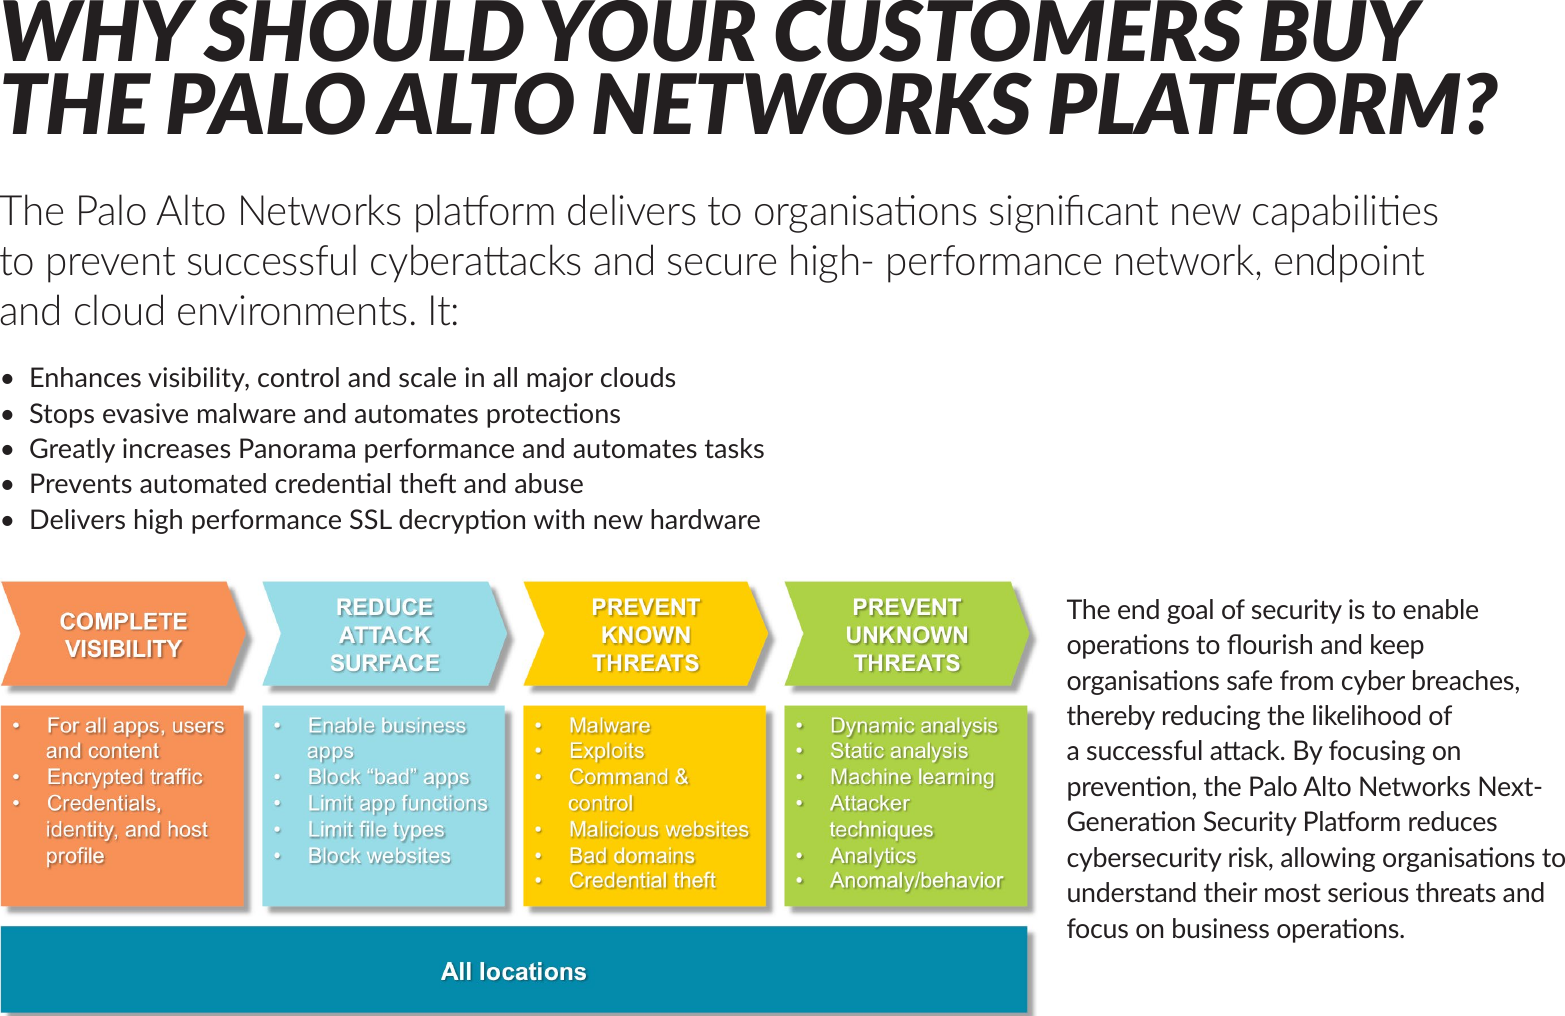 Page 5 of 9 - How-to-guide-palo-alto-networks-platform